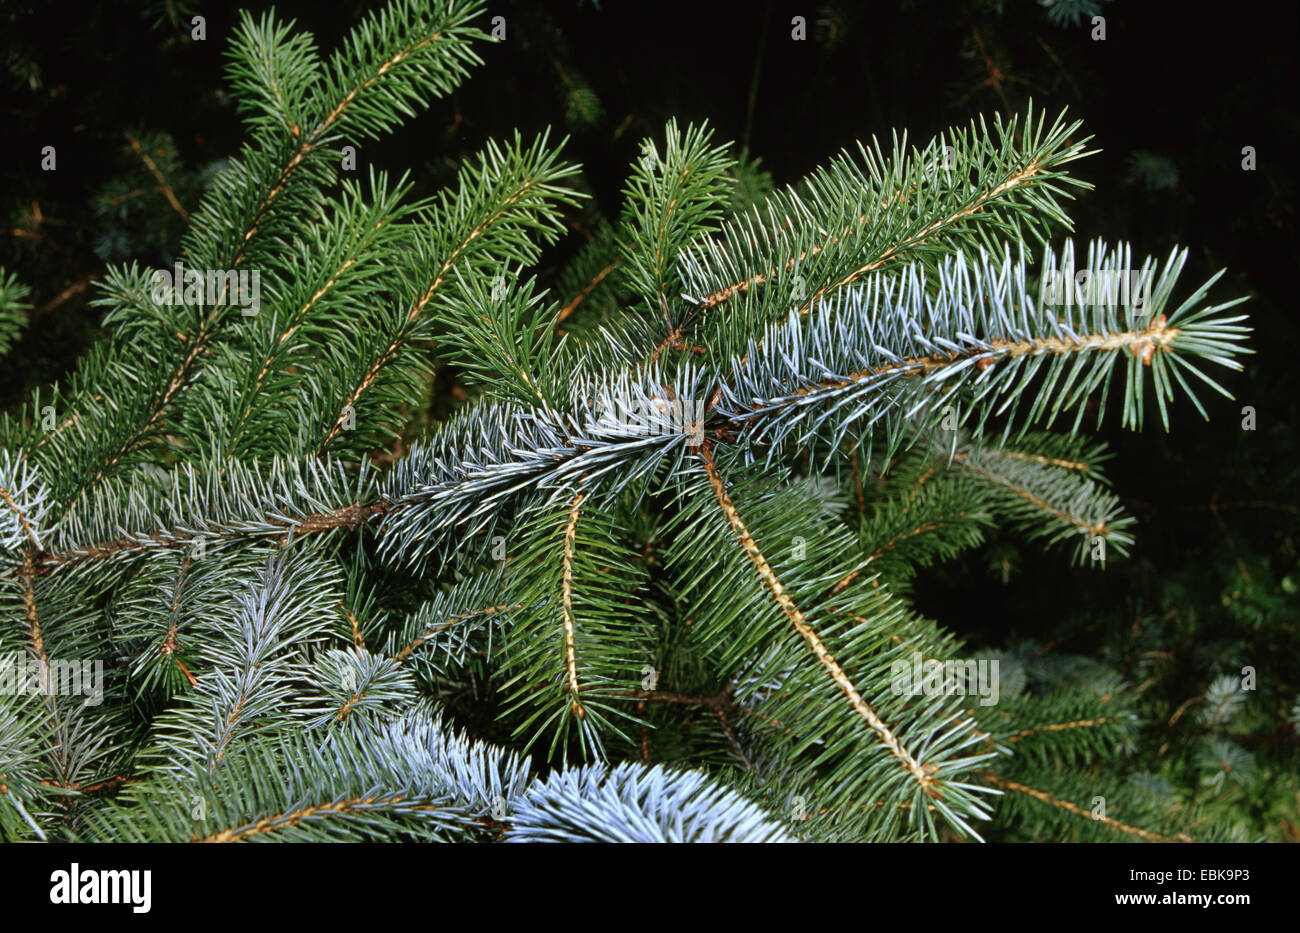 sitka spruce (Picea sitchensis), branch Stock Photo